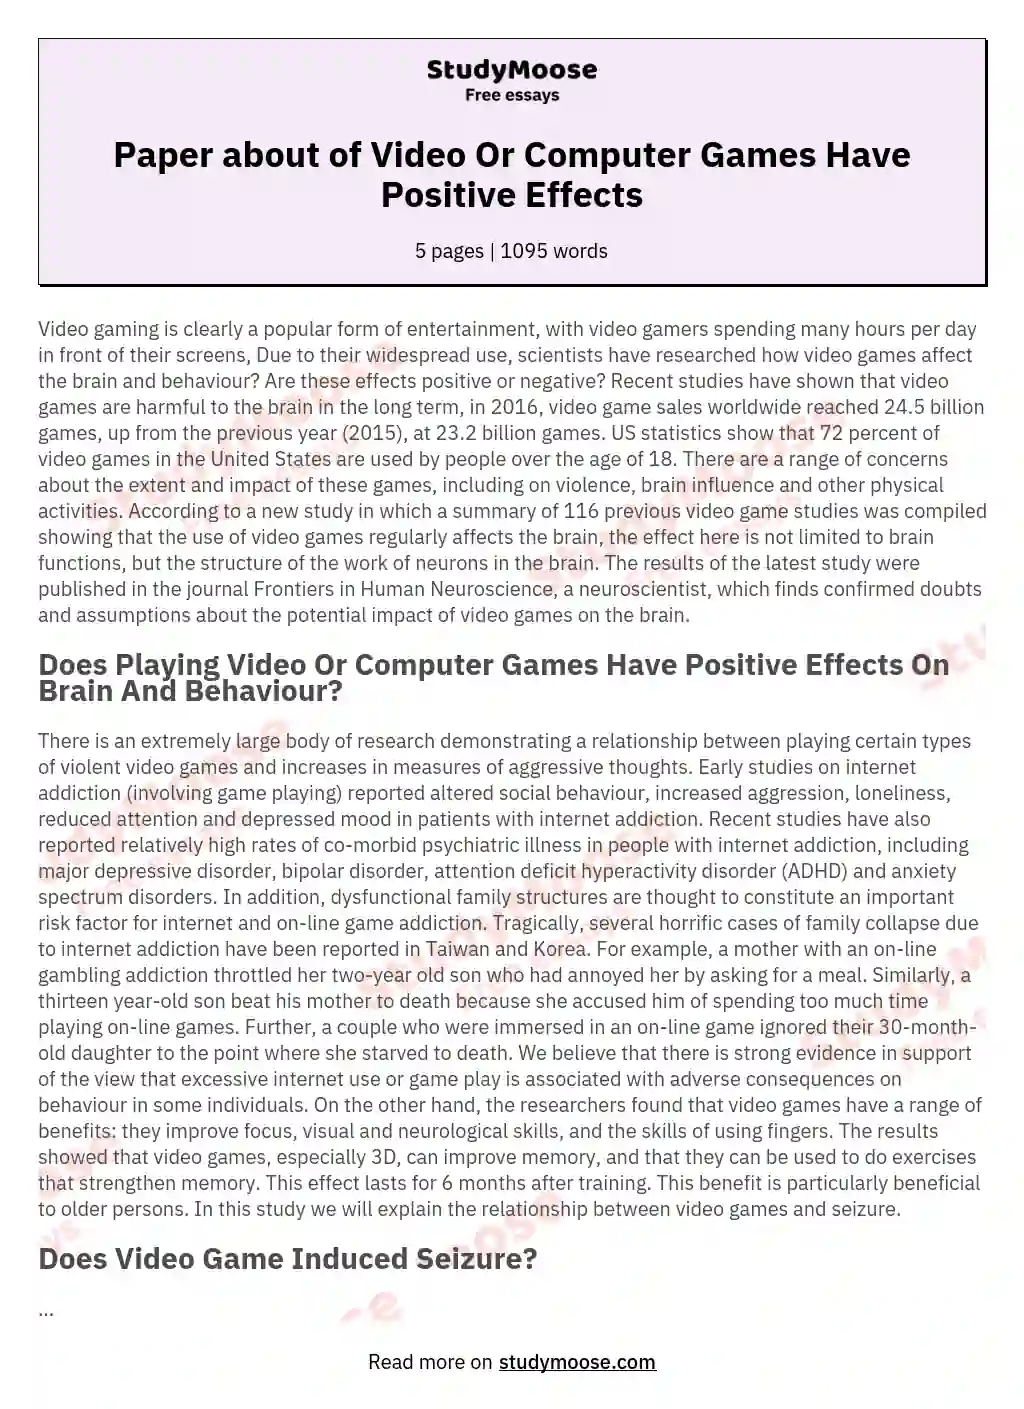 Paper about of Video Or Computer Games Have Positive Effects